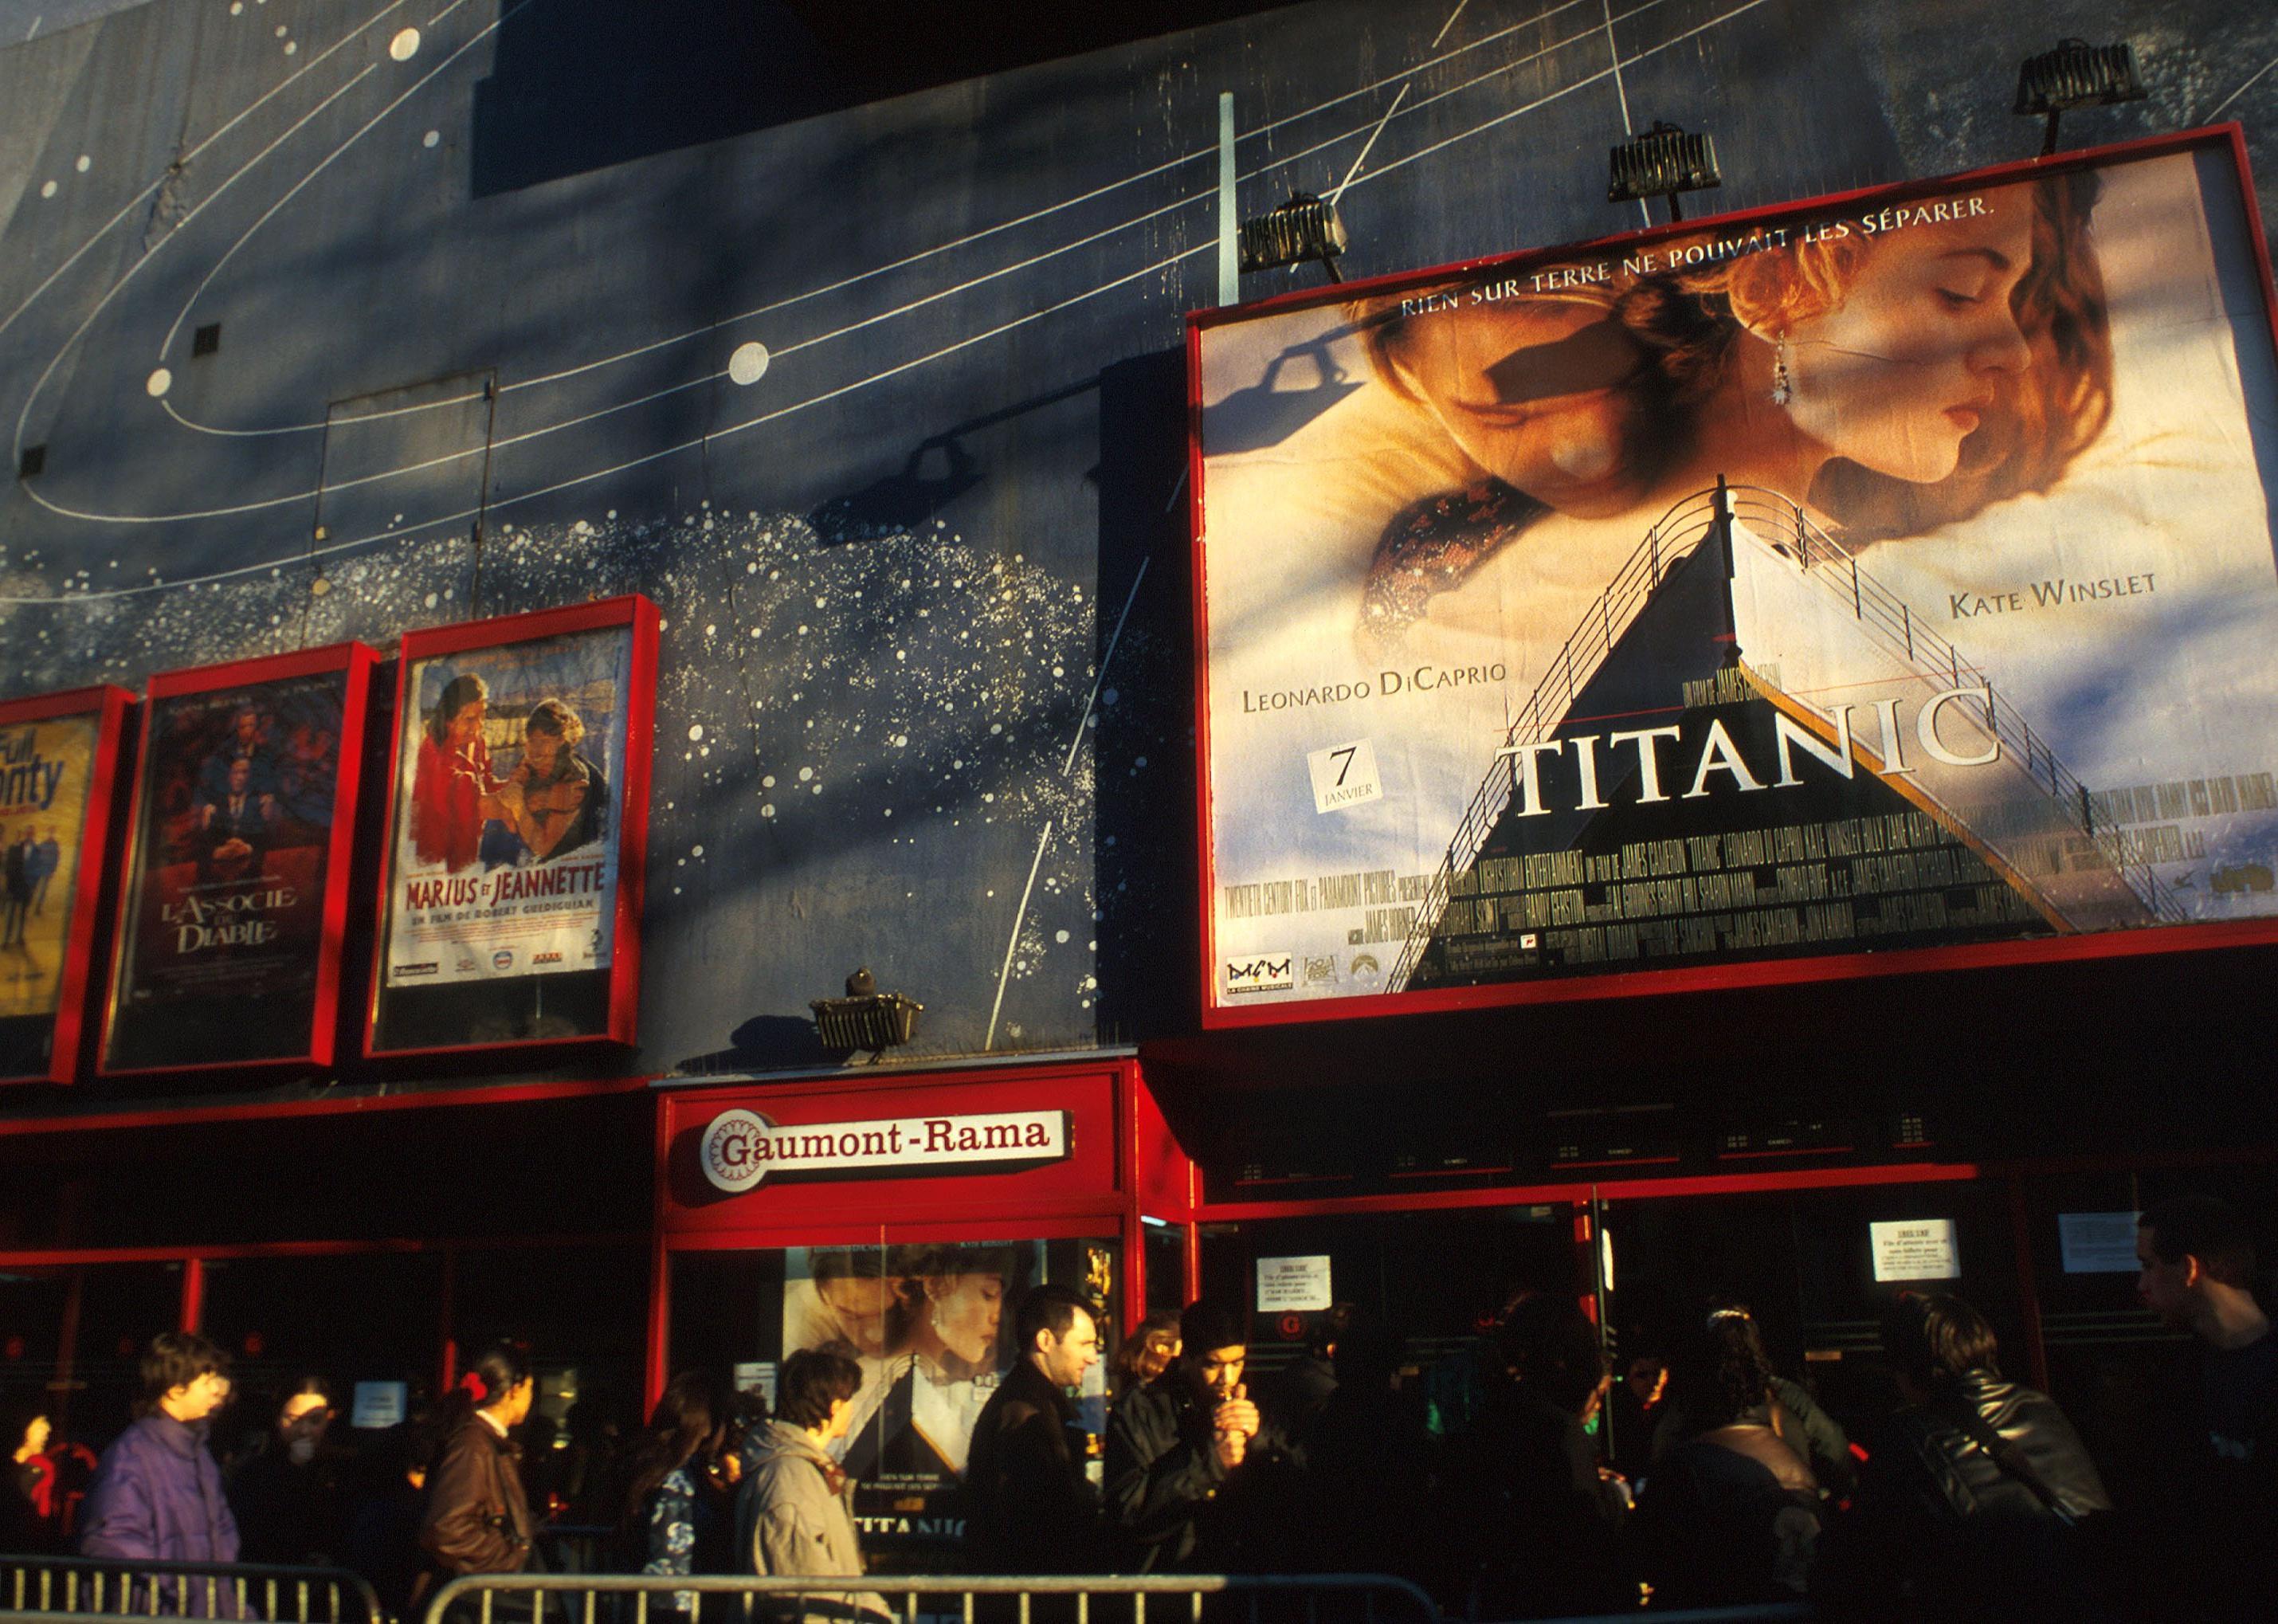 Advertisements for movies outside a theater, including one for Titanic, in 1998.